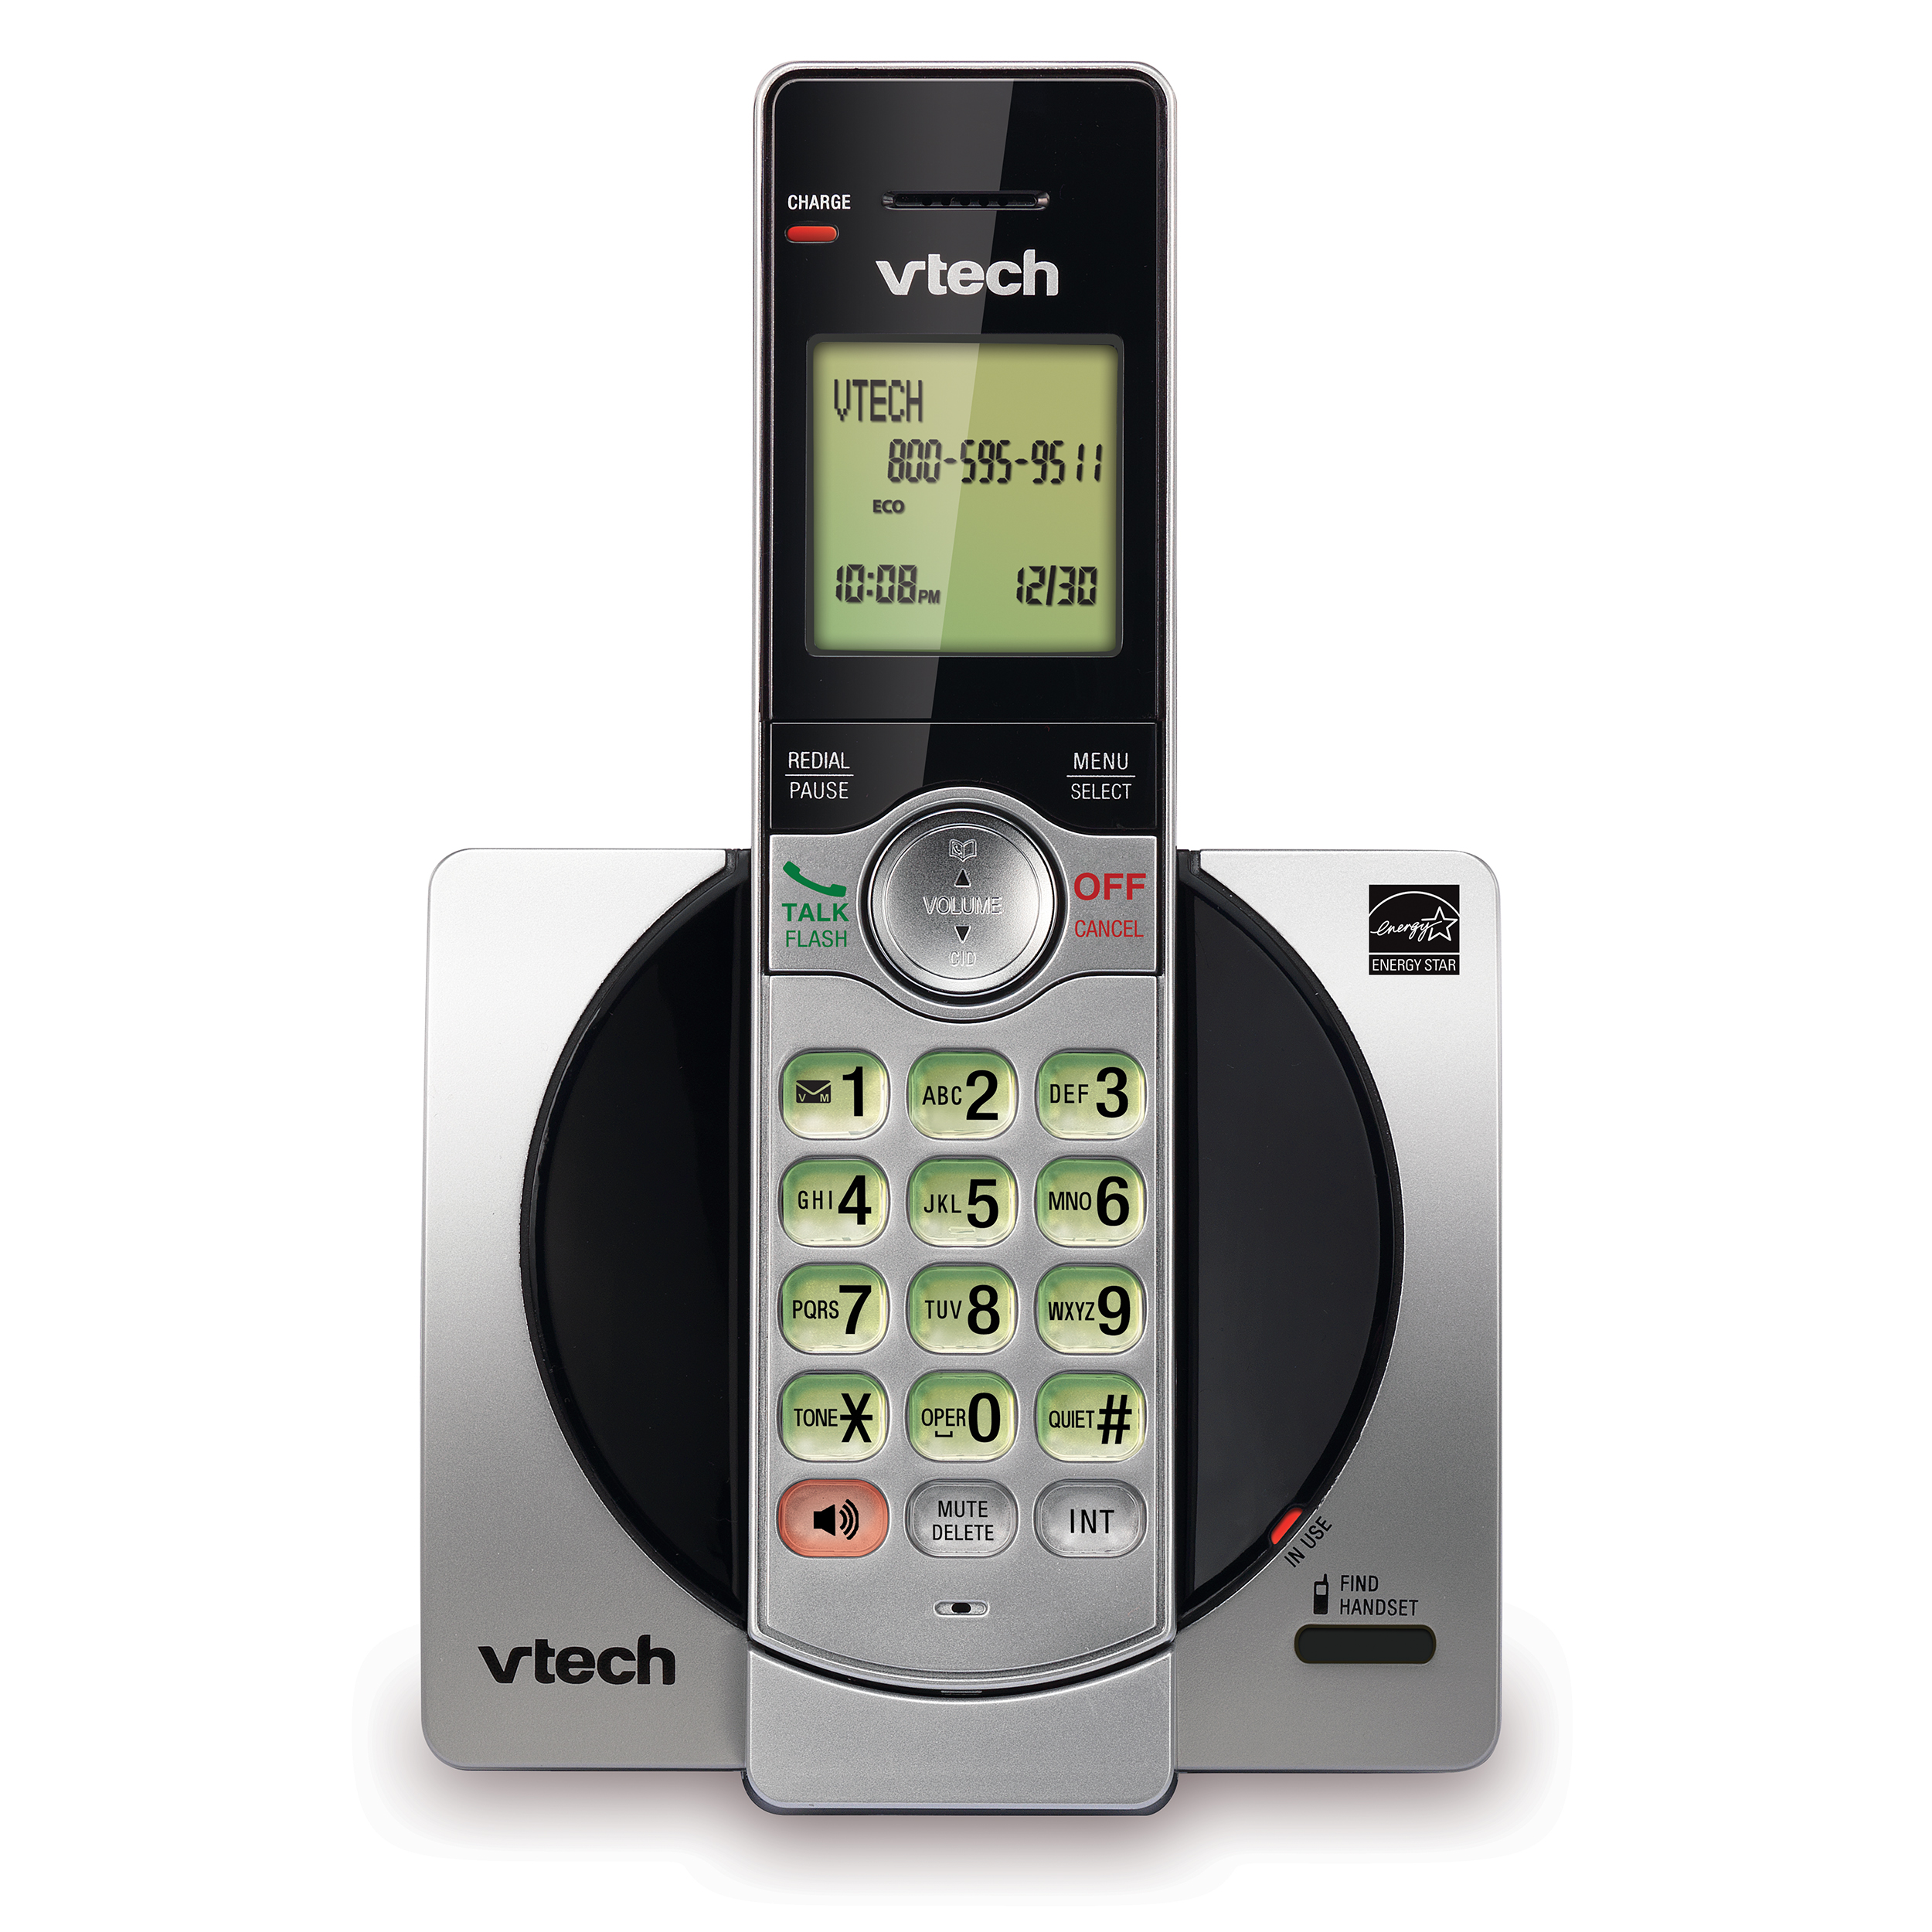 VTech DECT 6.0 Expandable Cordless Phone with Call Block, CS6919 (Silver & Black) - image 1 of 3